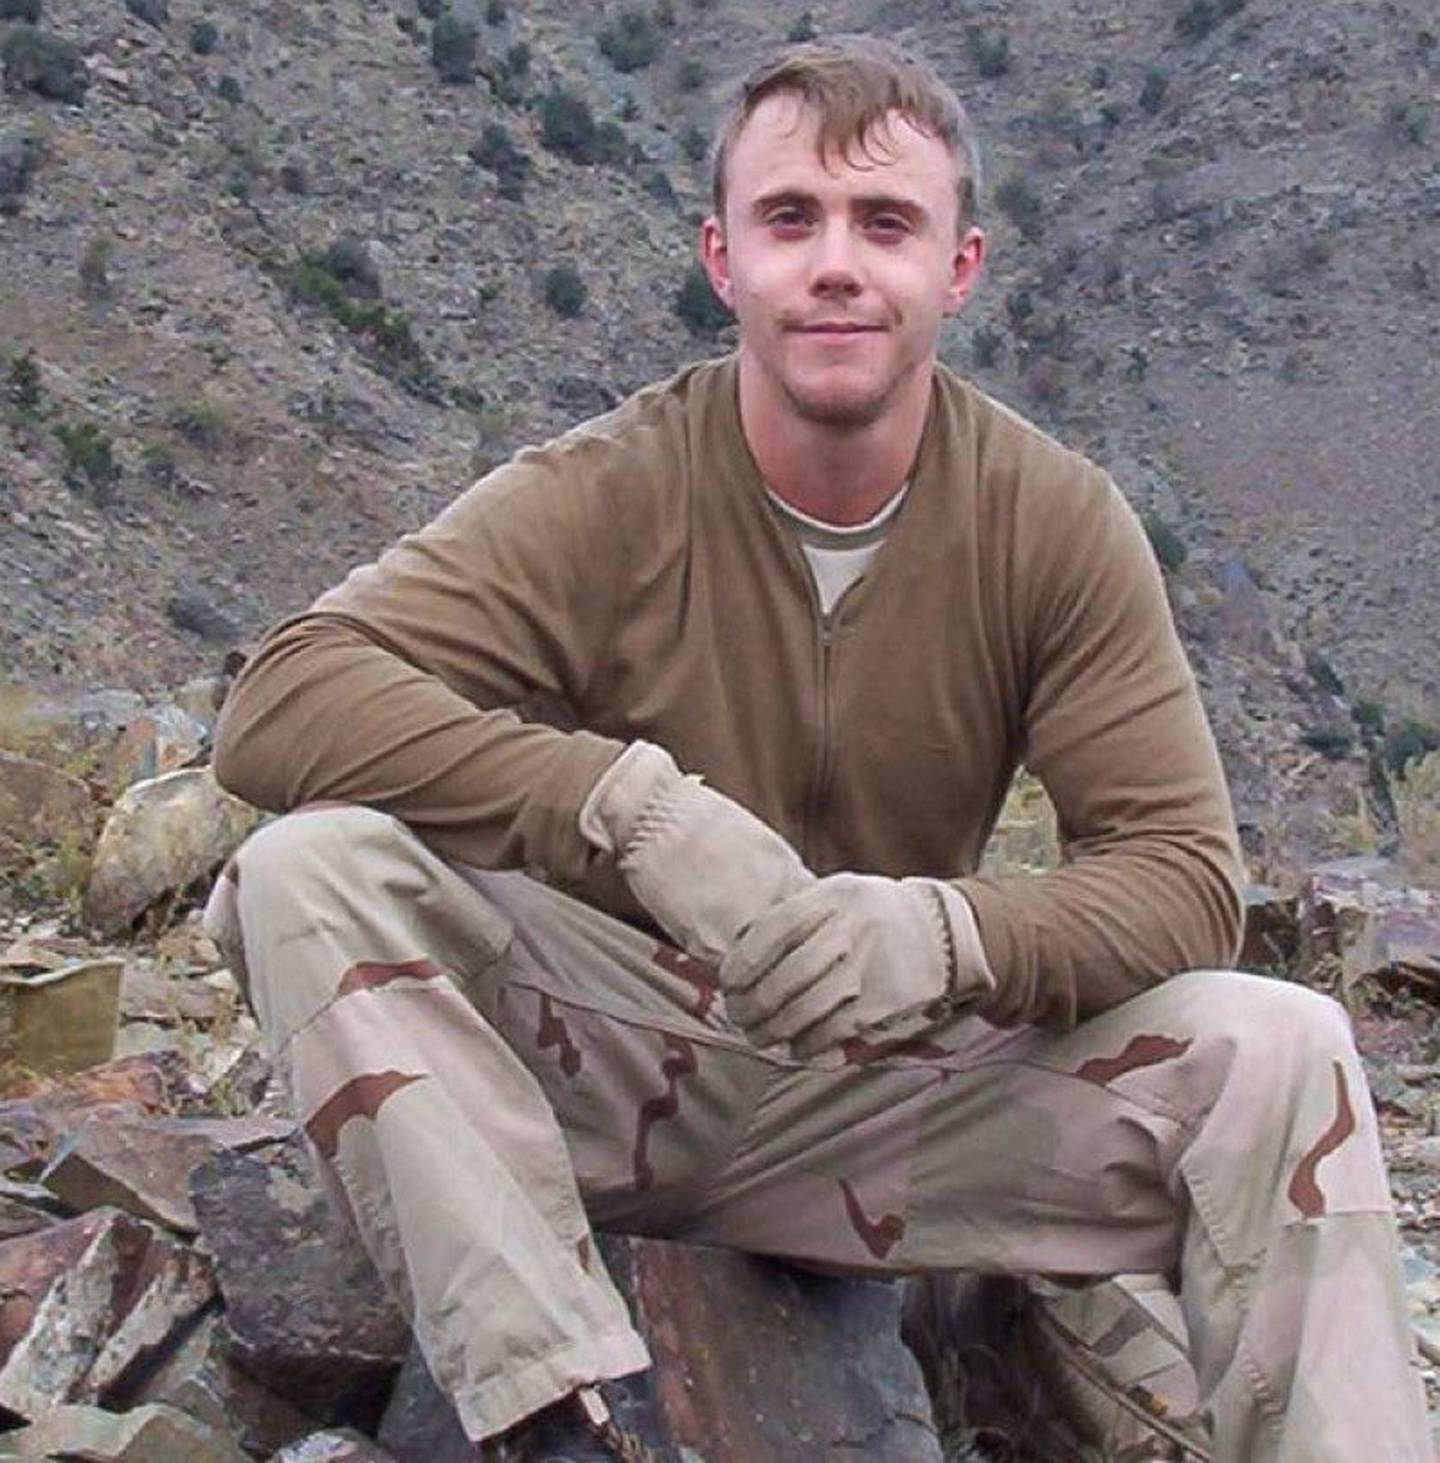 Army Staff Sgt. Robert J. Miller enjoys some downtime while deployed in Afghanistan. Miller was killed on Jan. 25, 2008, while saving the lives of other coalition forces during battle.